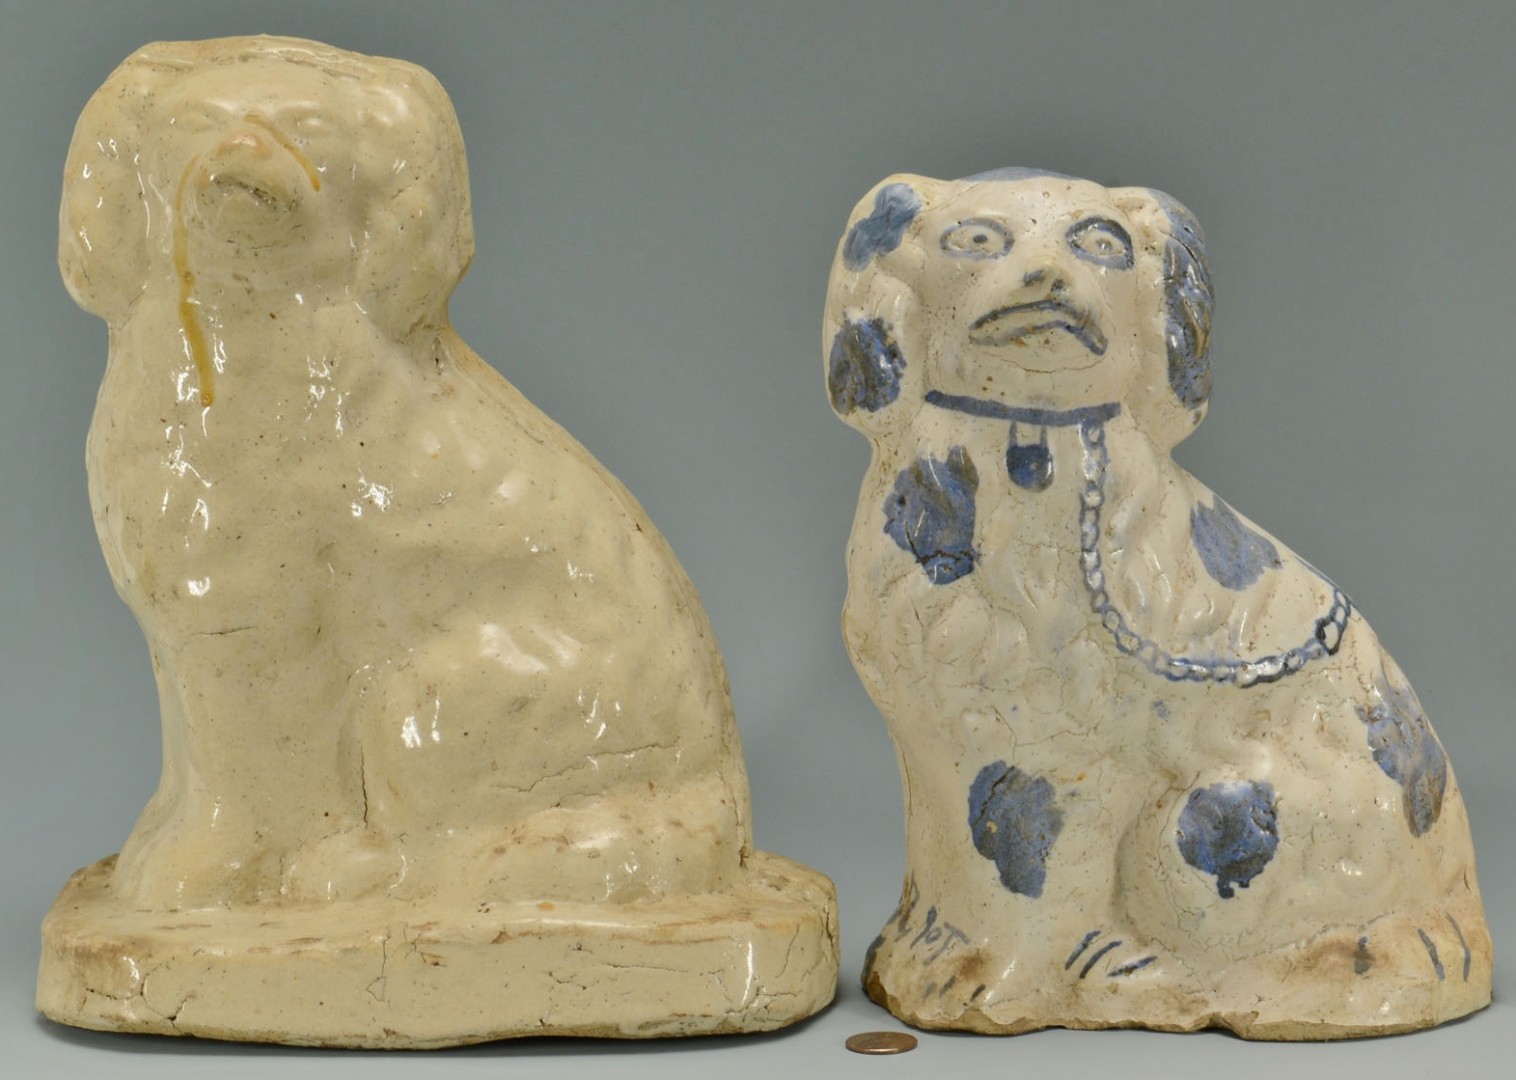 Lot 61: Grouping of 4 Sewer Tile Spaniel Dogs